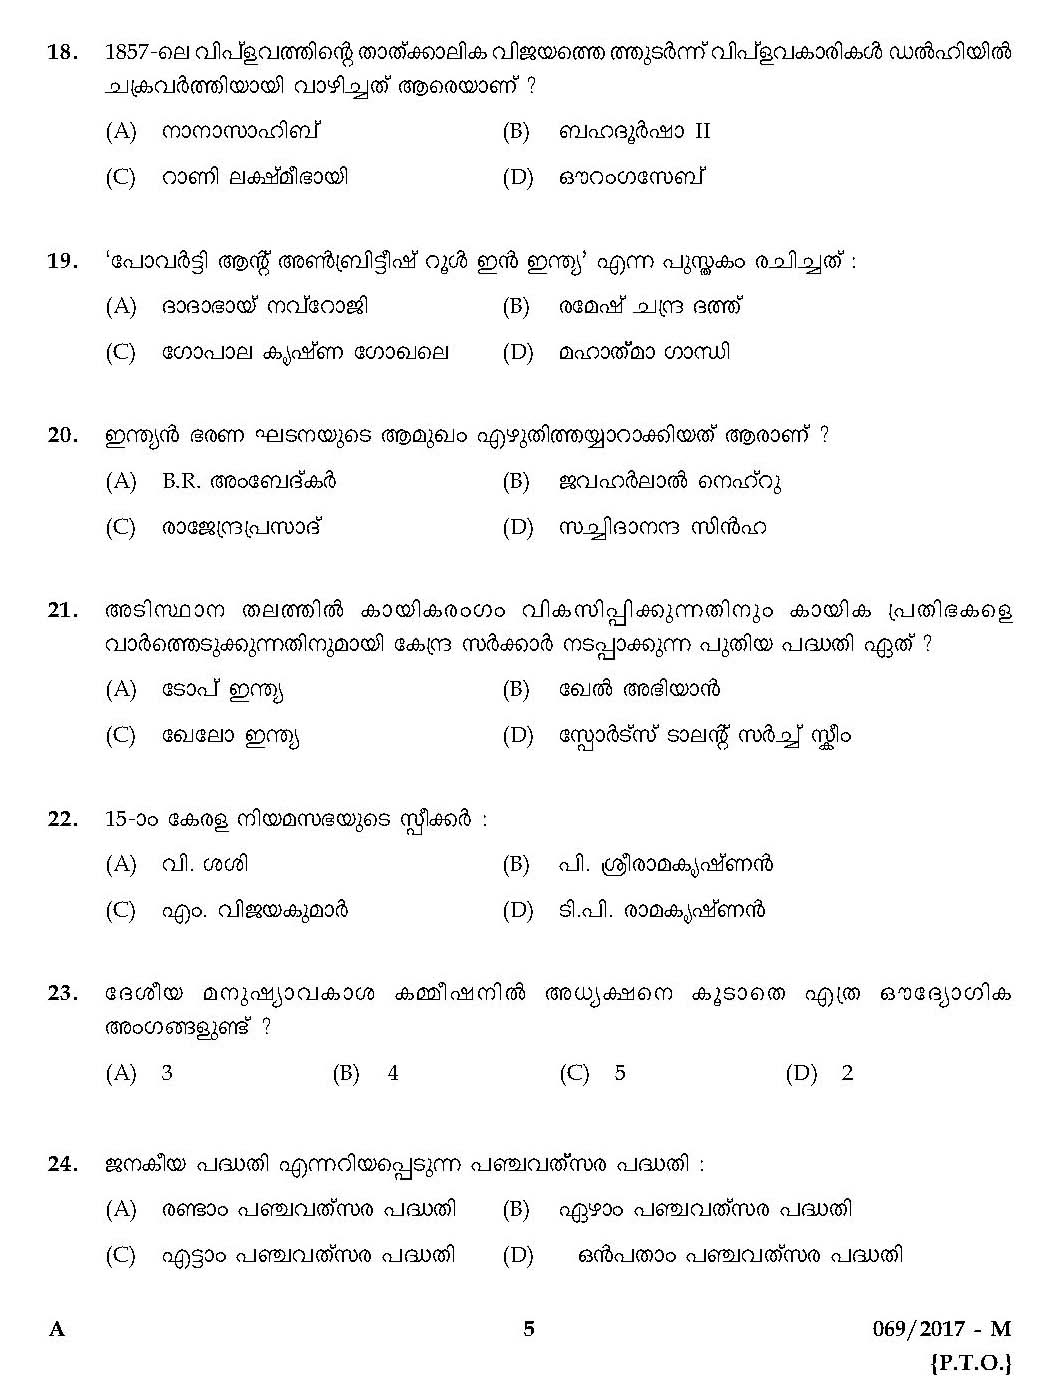 LD Clerk Question Paper 2017 Malayalam Paper Code 0692017 M 4